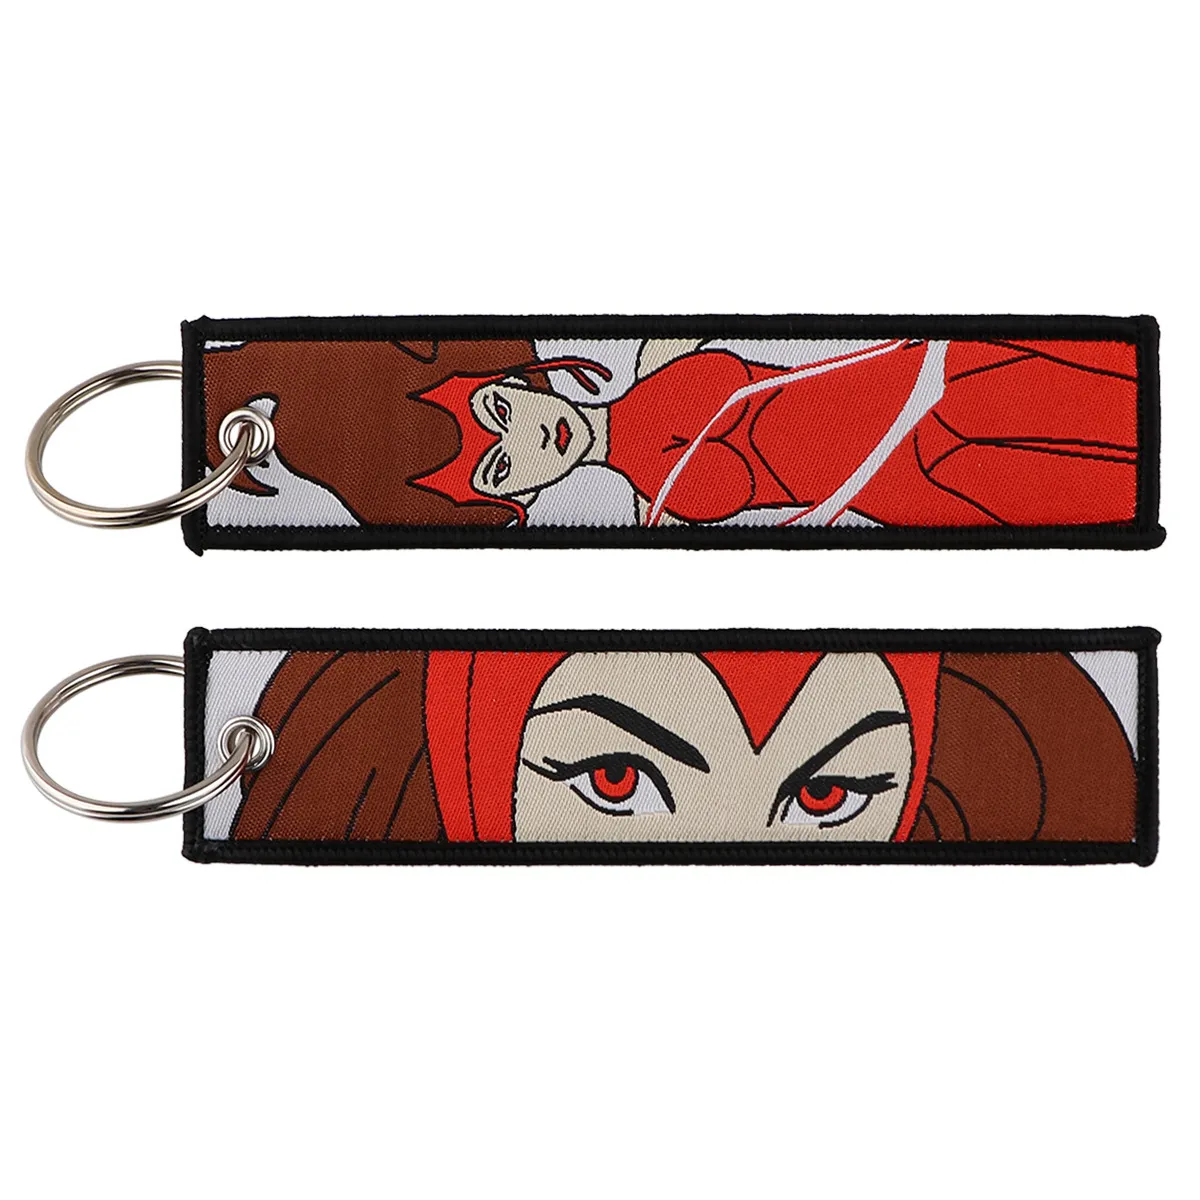 Keychains & Lanyards Various Types Of Cartoon Cool Key Tag Embroidery Fobs For Motorcycles Cars Bag Backpack Keychain Fashion Ring Gi Otc1D